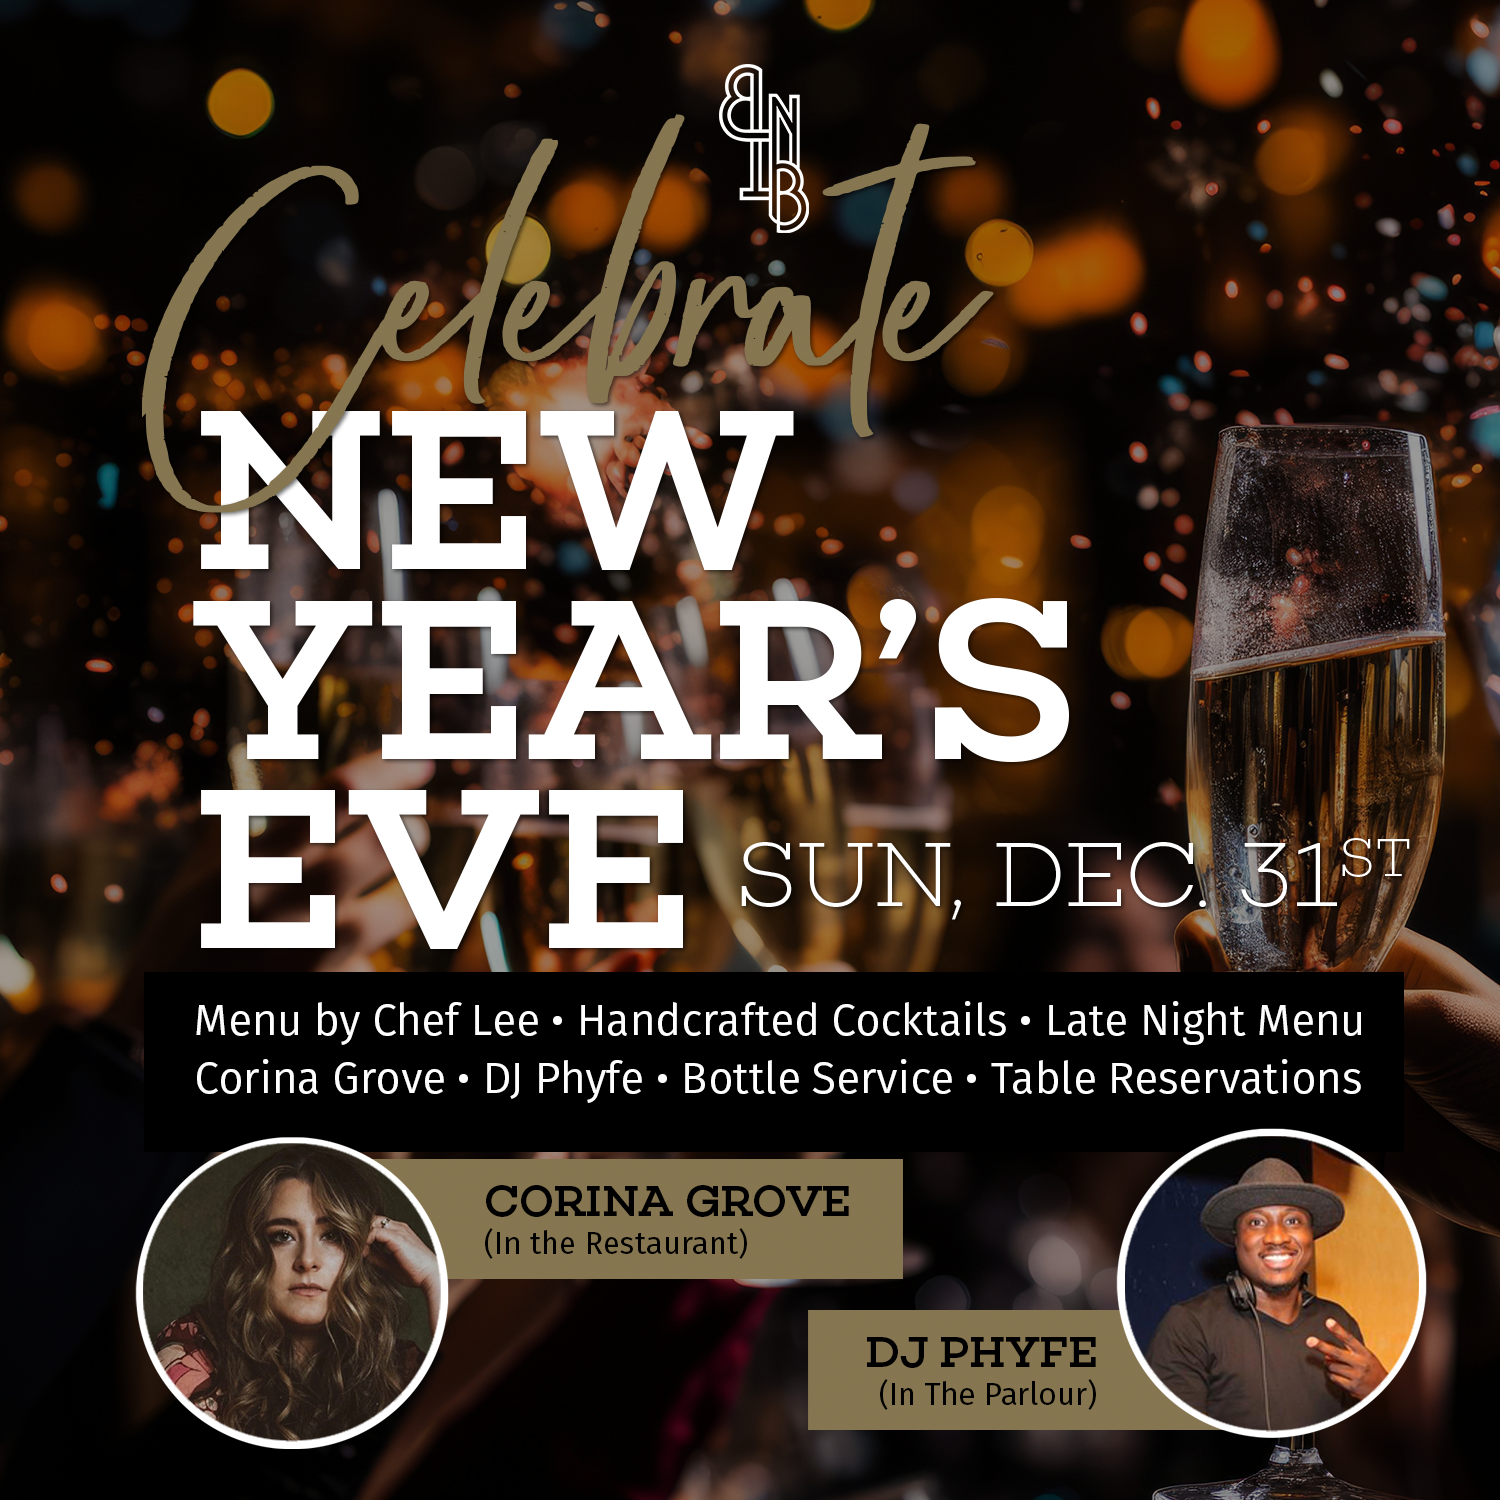 Champagne toast in the background to Celebrate New Year's Eve at Bottled in Bond in Frisco, Texas on Sunday, December 31, 2023 featuring Corina Grove performing in the restaurant, DJ Phyfe in the Parlour, Menu by Chef Lee, Table Reservation and Bottle Service.